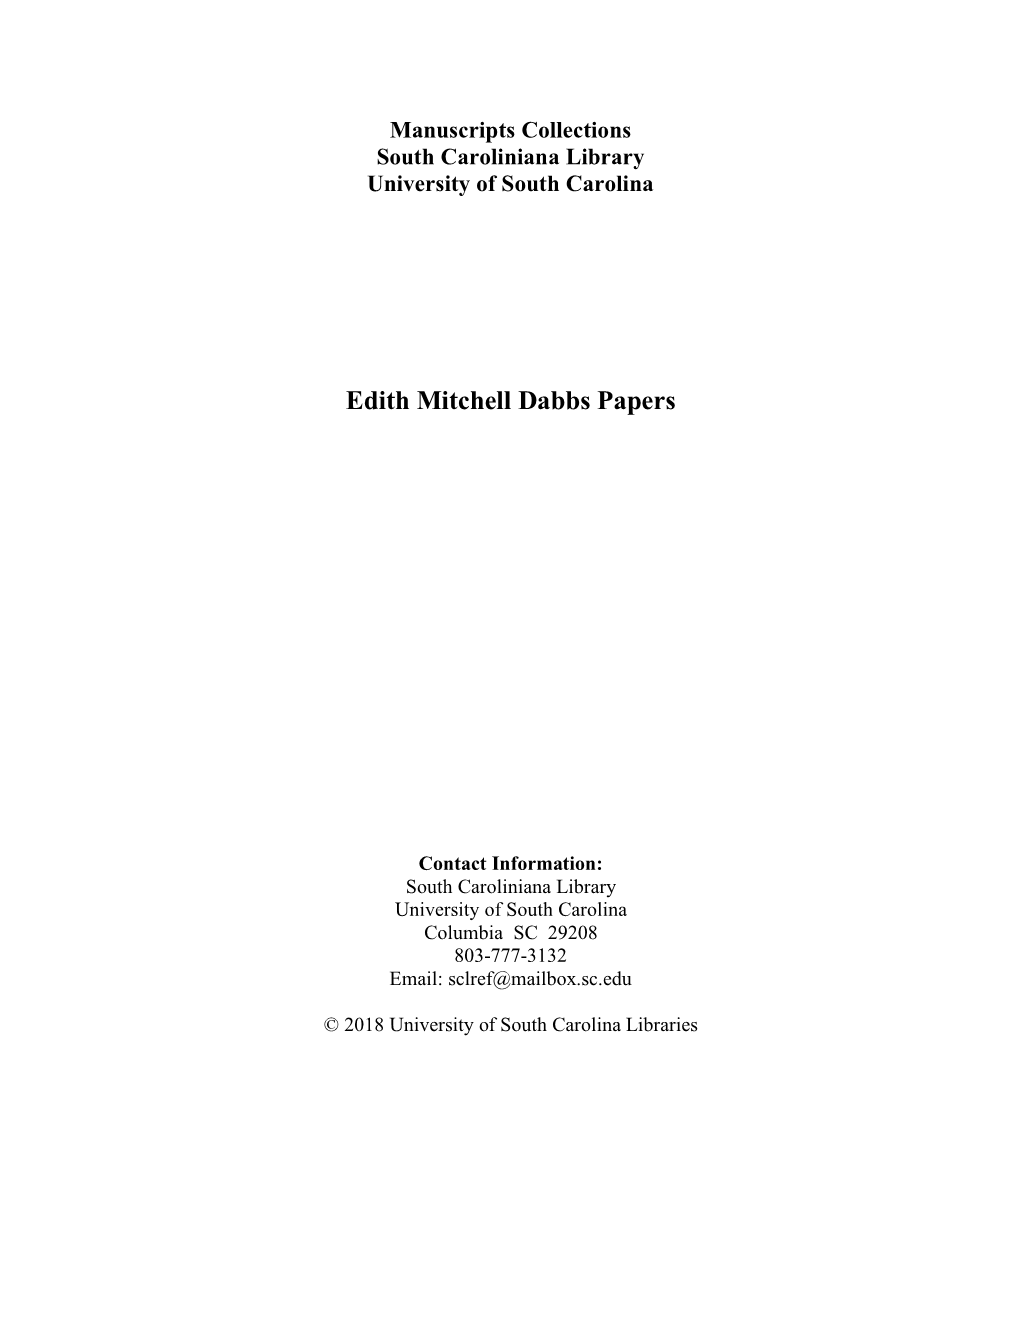 Edith Mitchell Dabbs Papers